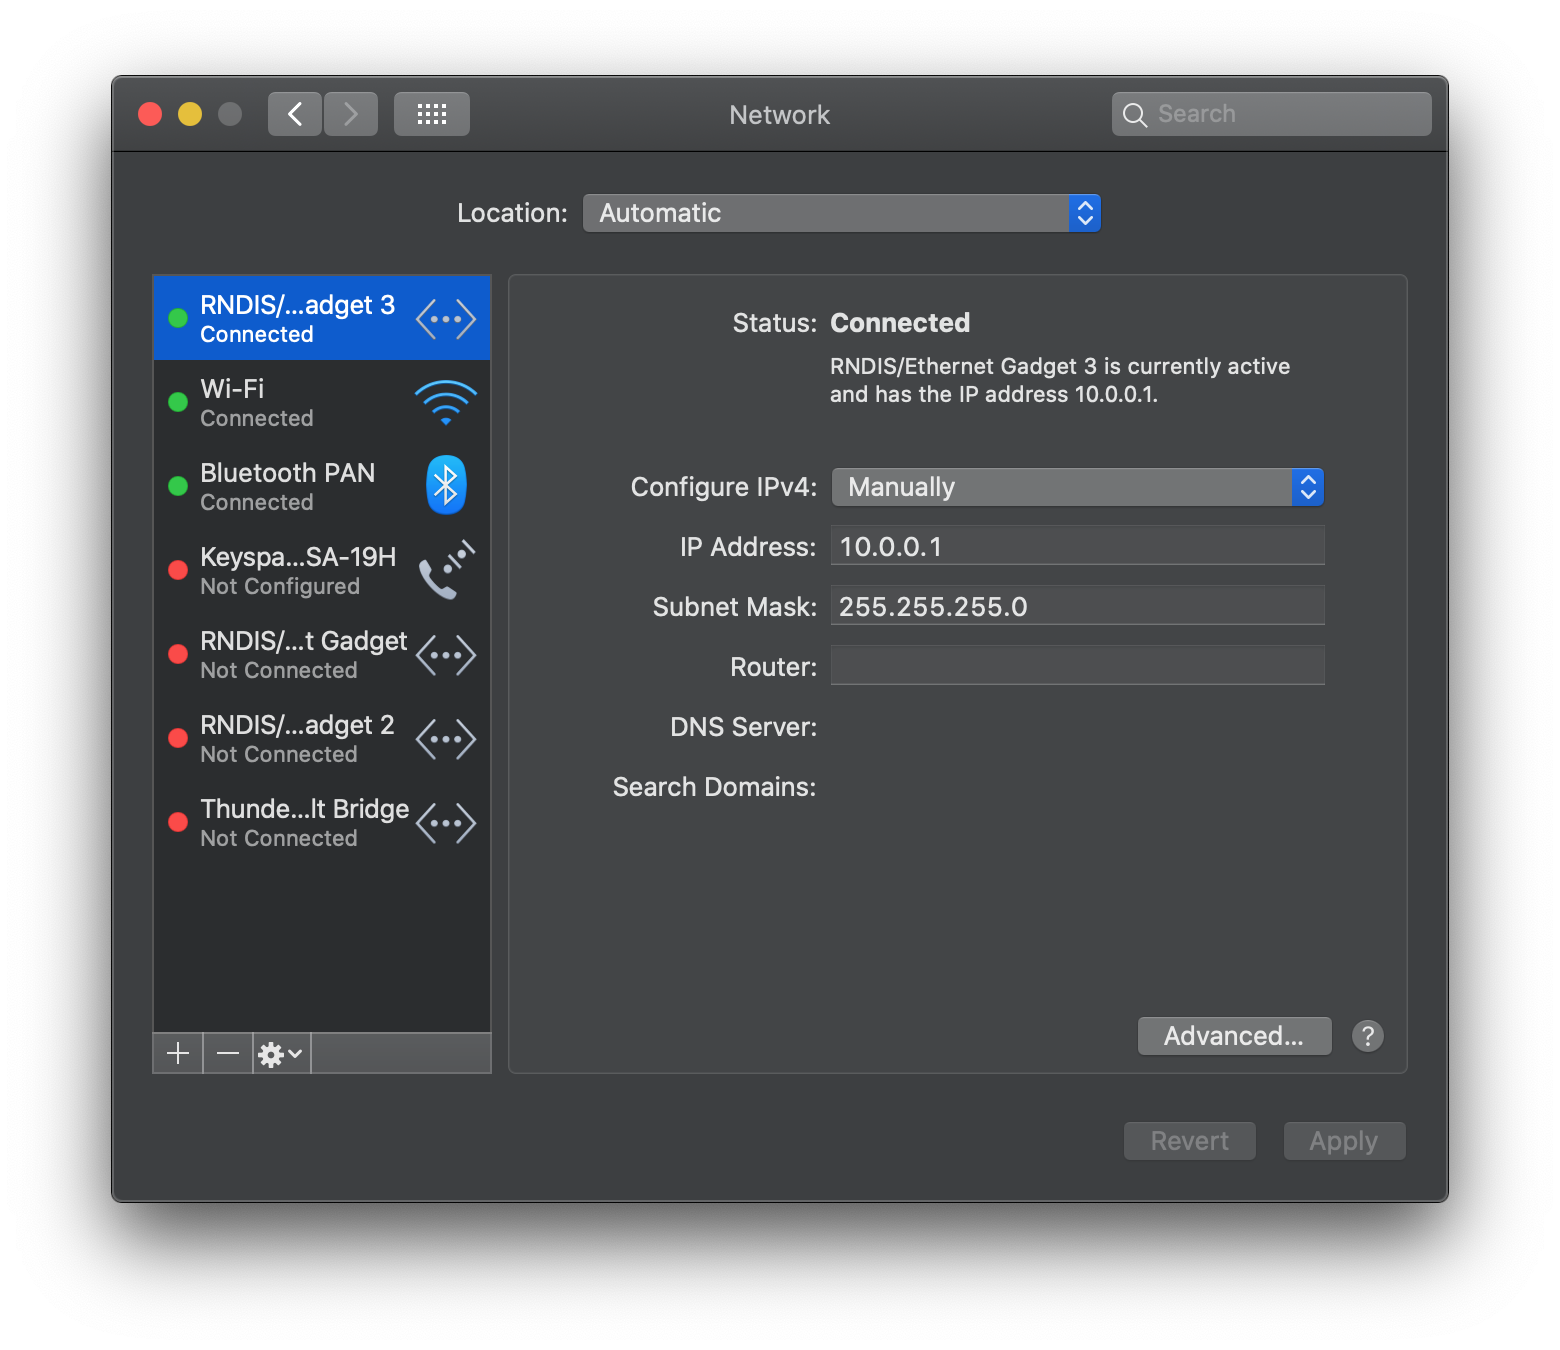 MacOS Catalina Network settings showing multiple RNDIS ethernet gadget interfaces